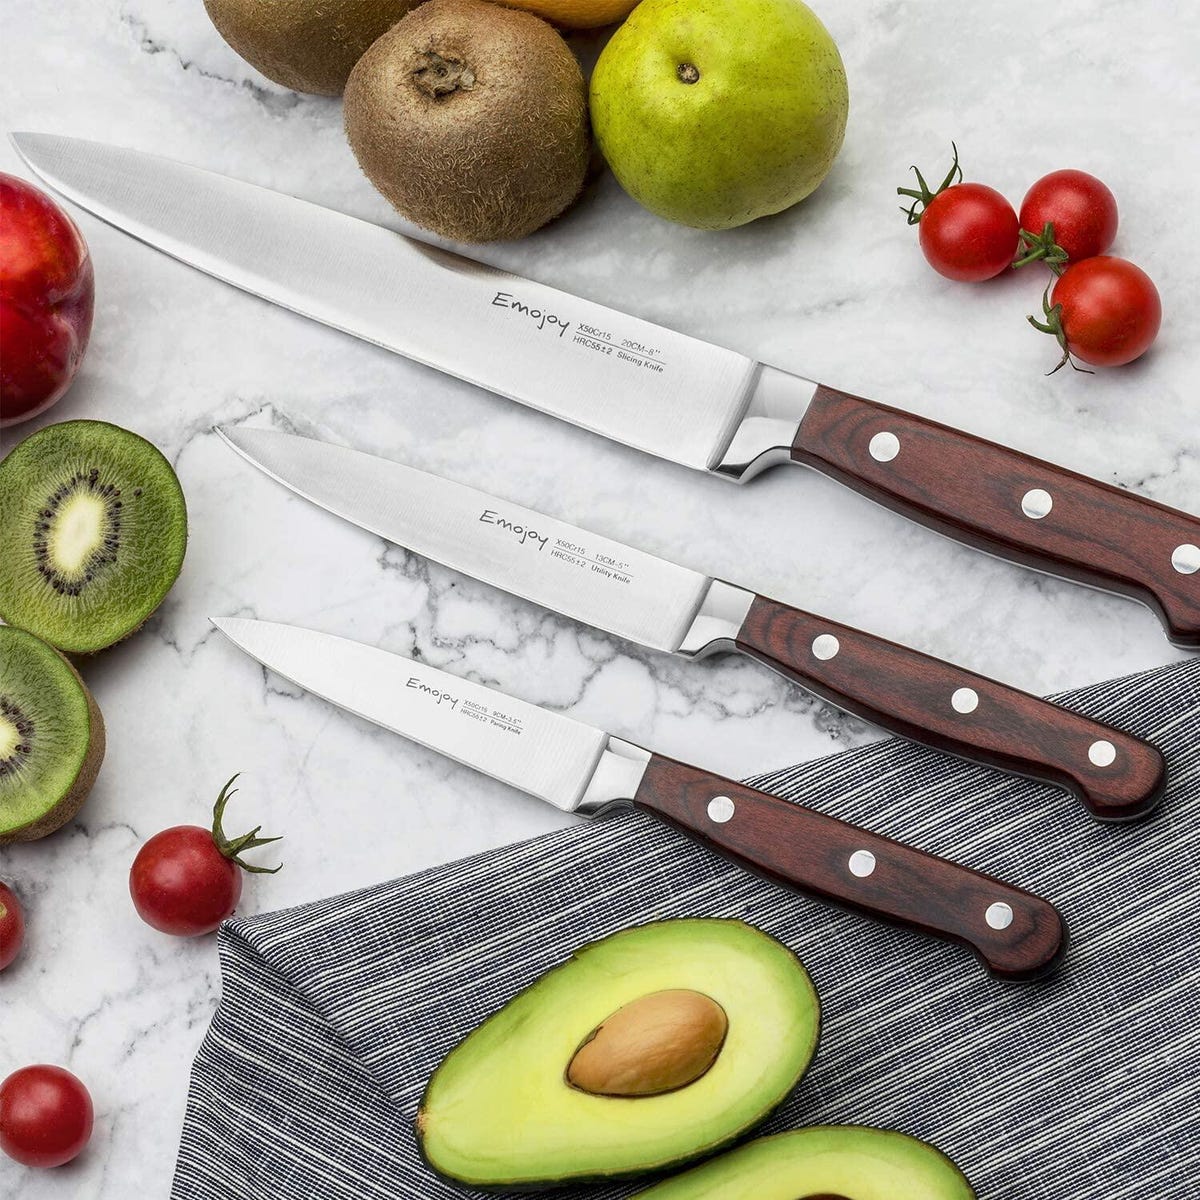 Best Prime Day 2020 knife deals: A full knife set for $40 with top